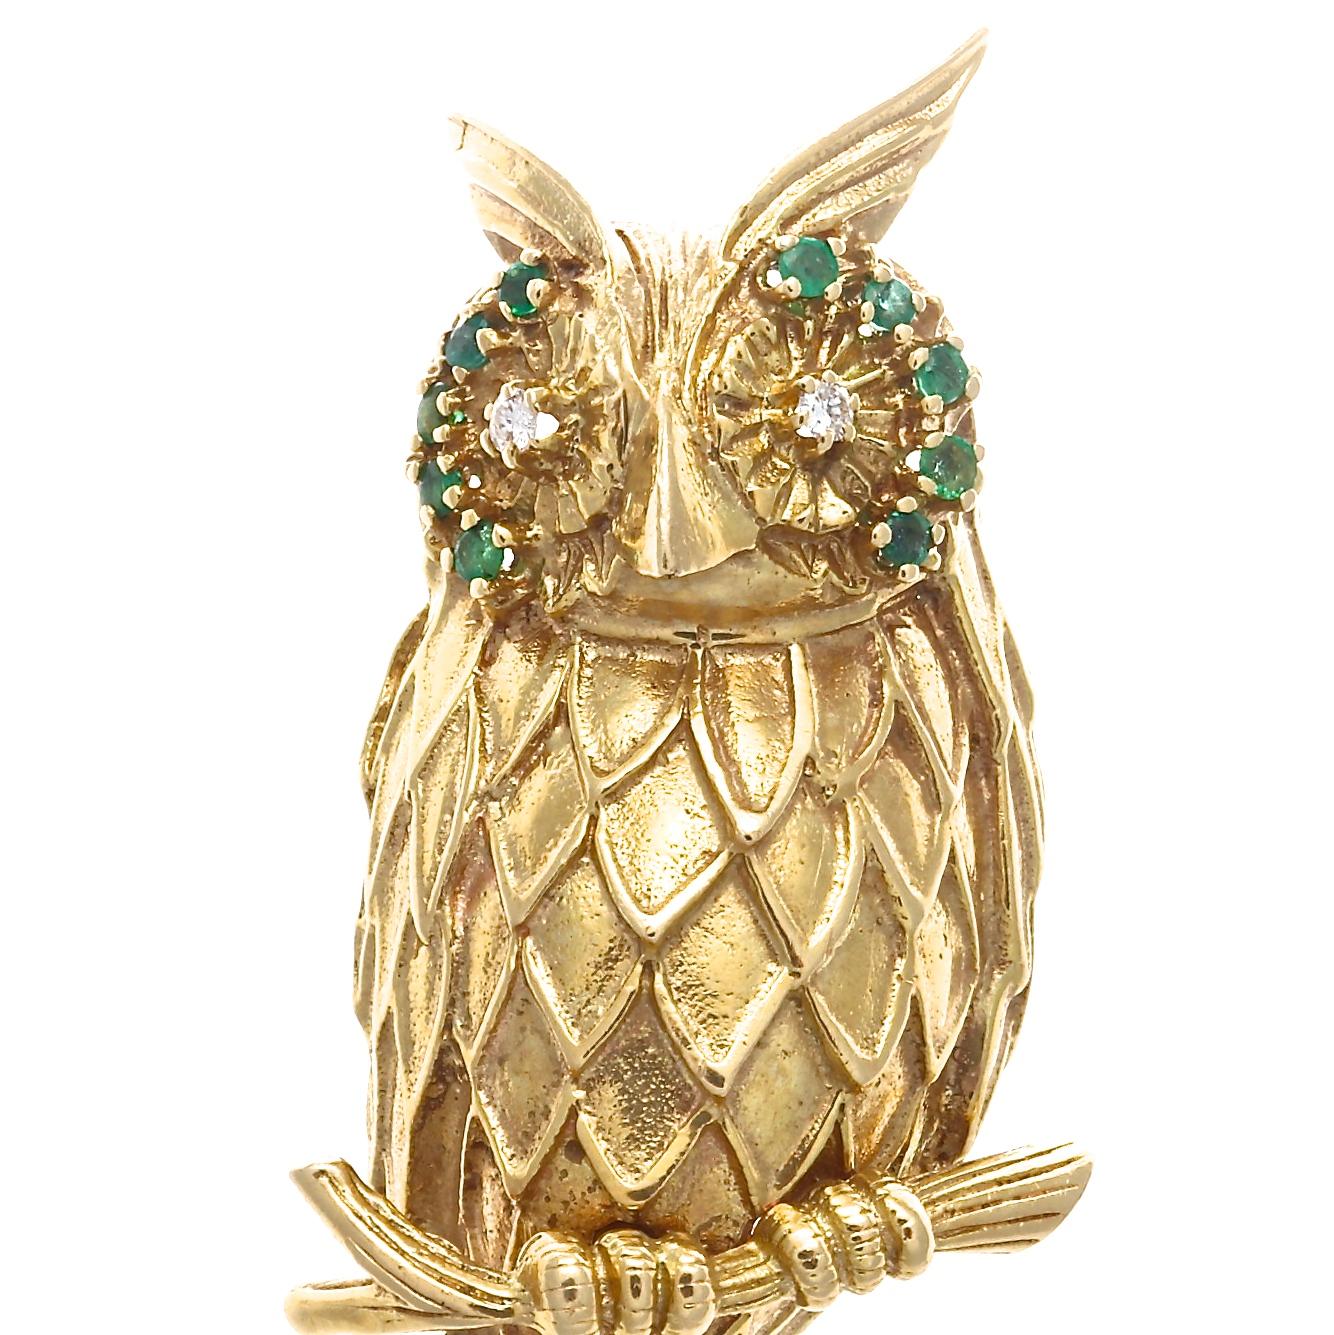 The fun and flair of the 1960's produced some of the most bold and whimsical jewelry. 
This beautifully detailed 14k yellow gold owl brooch is adorned with approximately 0.50 carats of emeralds, approximately 0.10 carats of diamonds with G-H color,